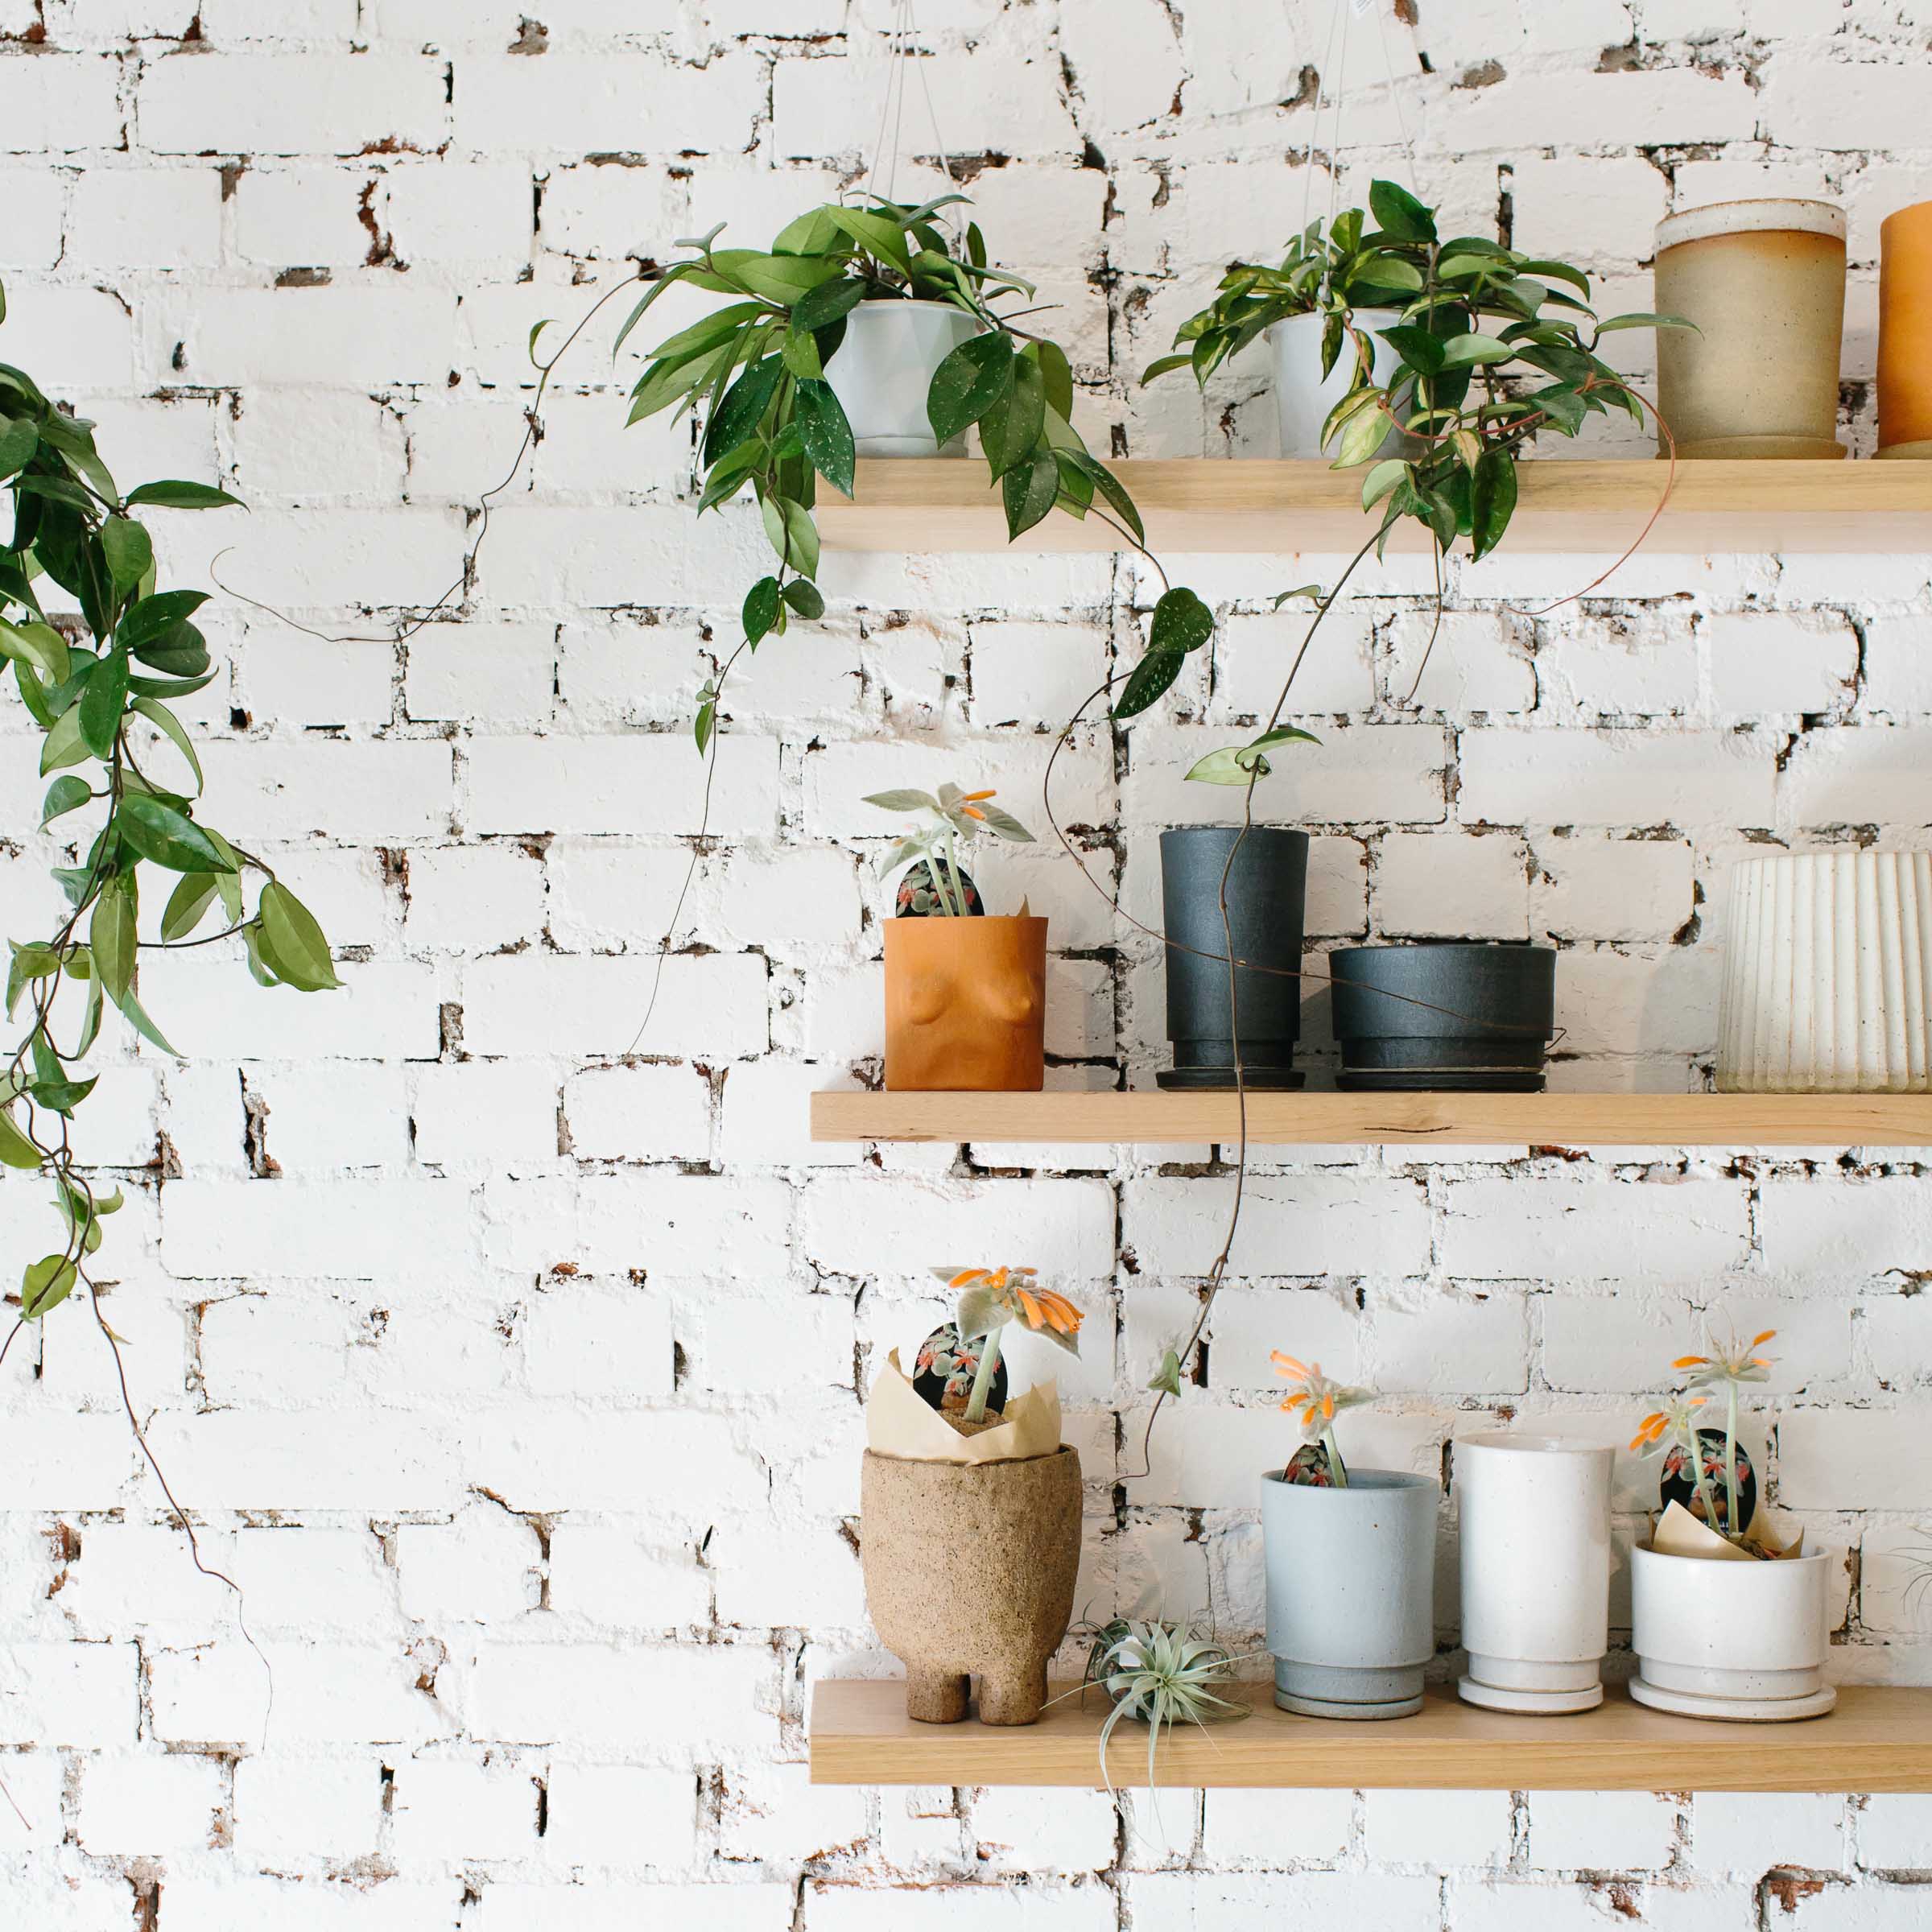 Local Melbourne ceramicists work on display at plant store Nature Boy Nrth